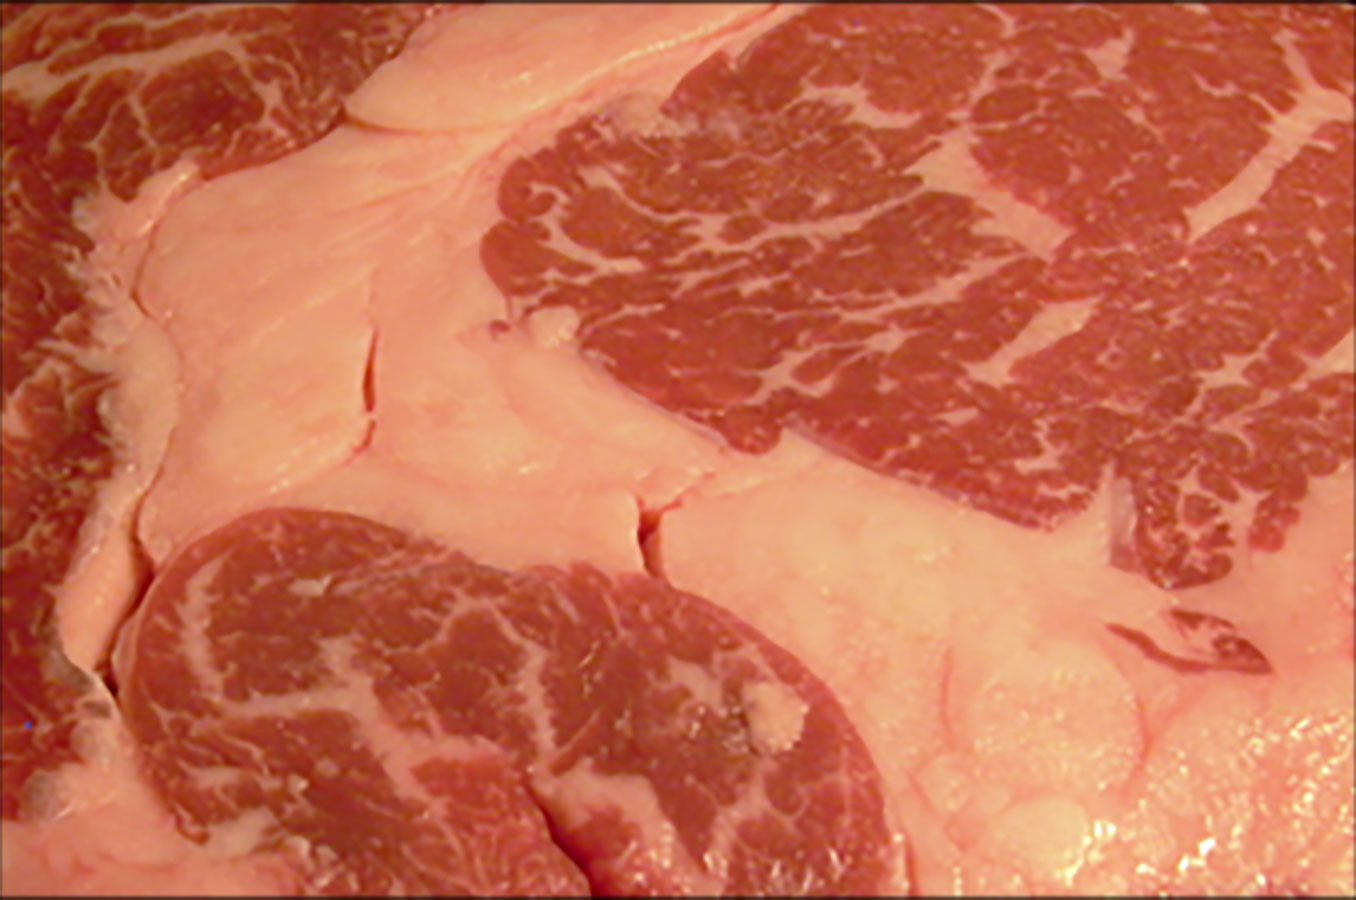 A cut of beef with streaks of fat throughout and large areas of solid fat.